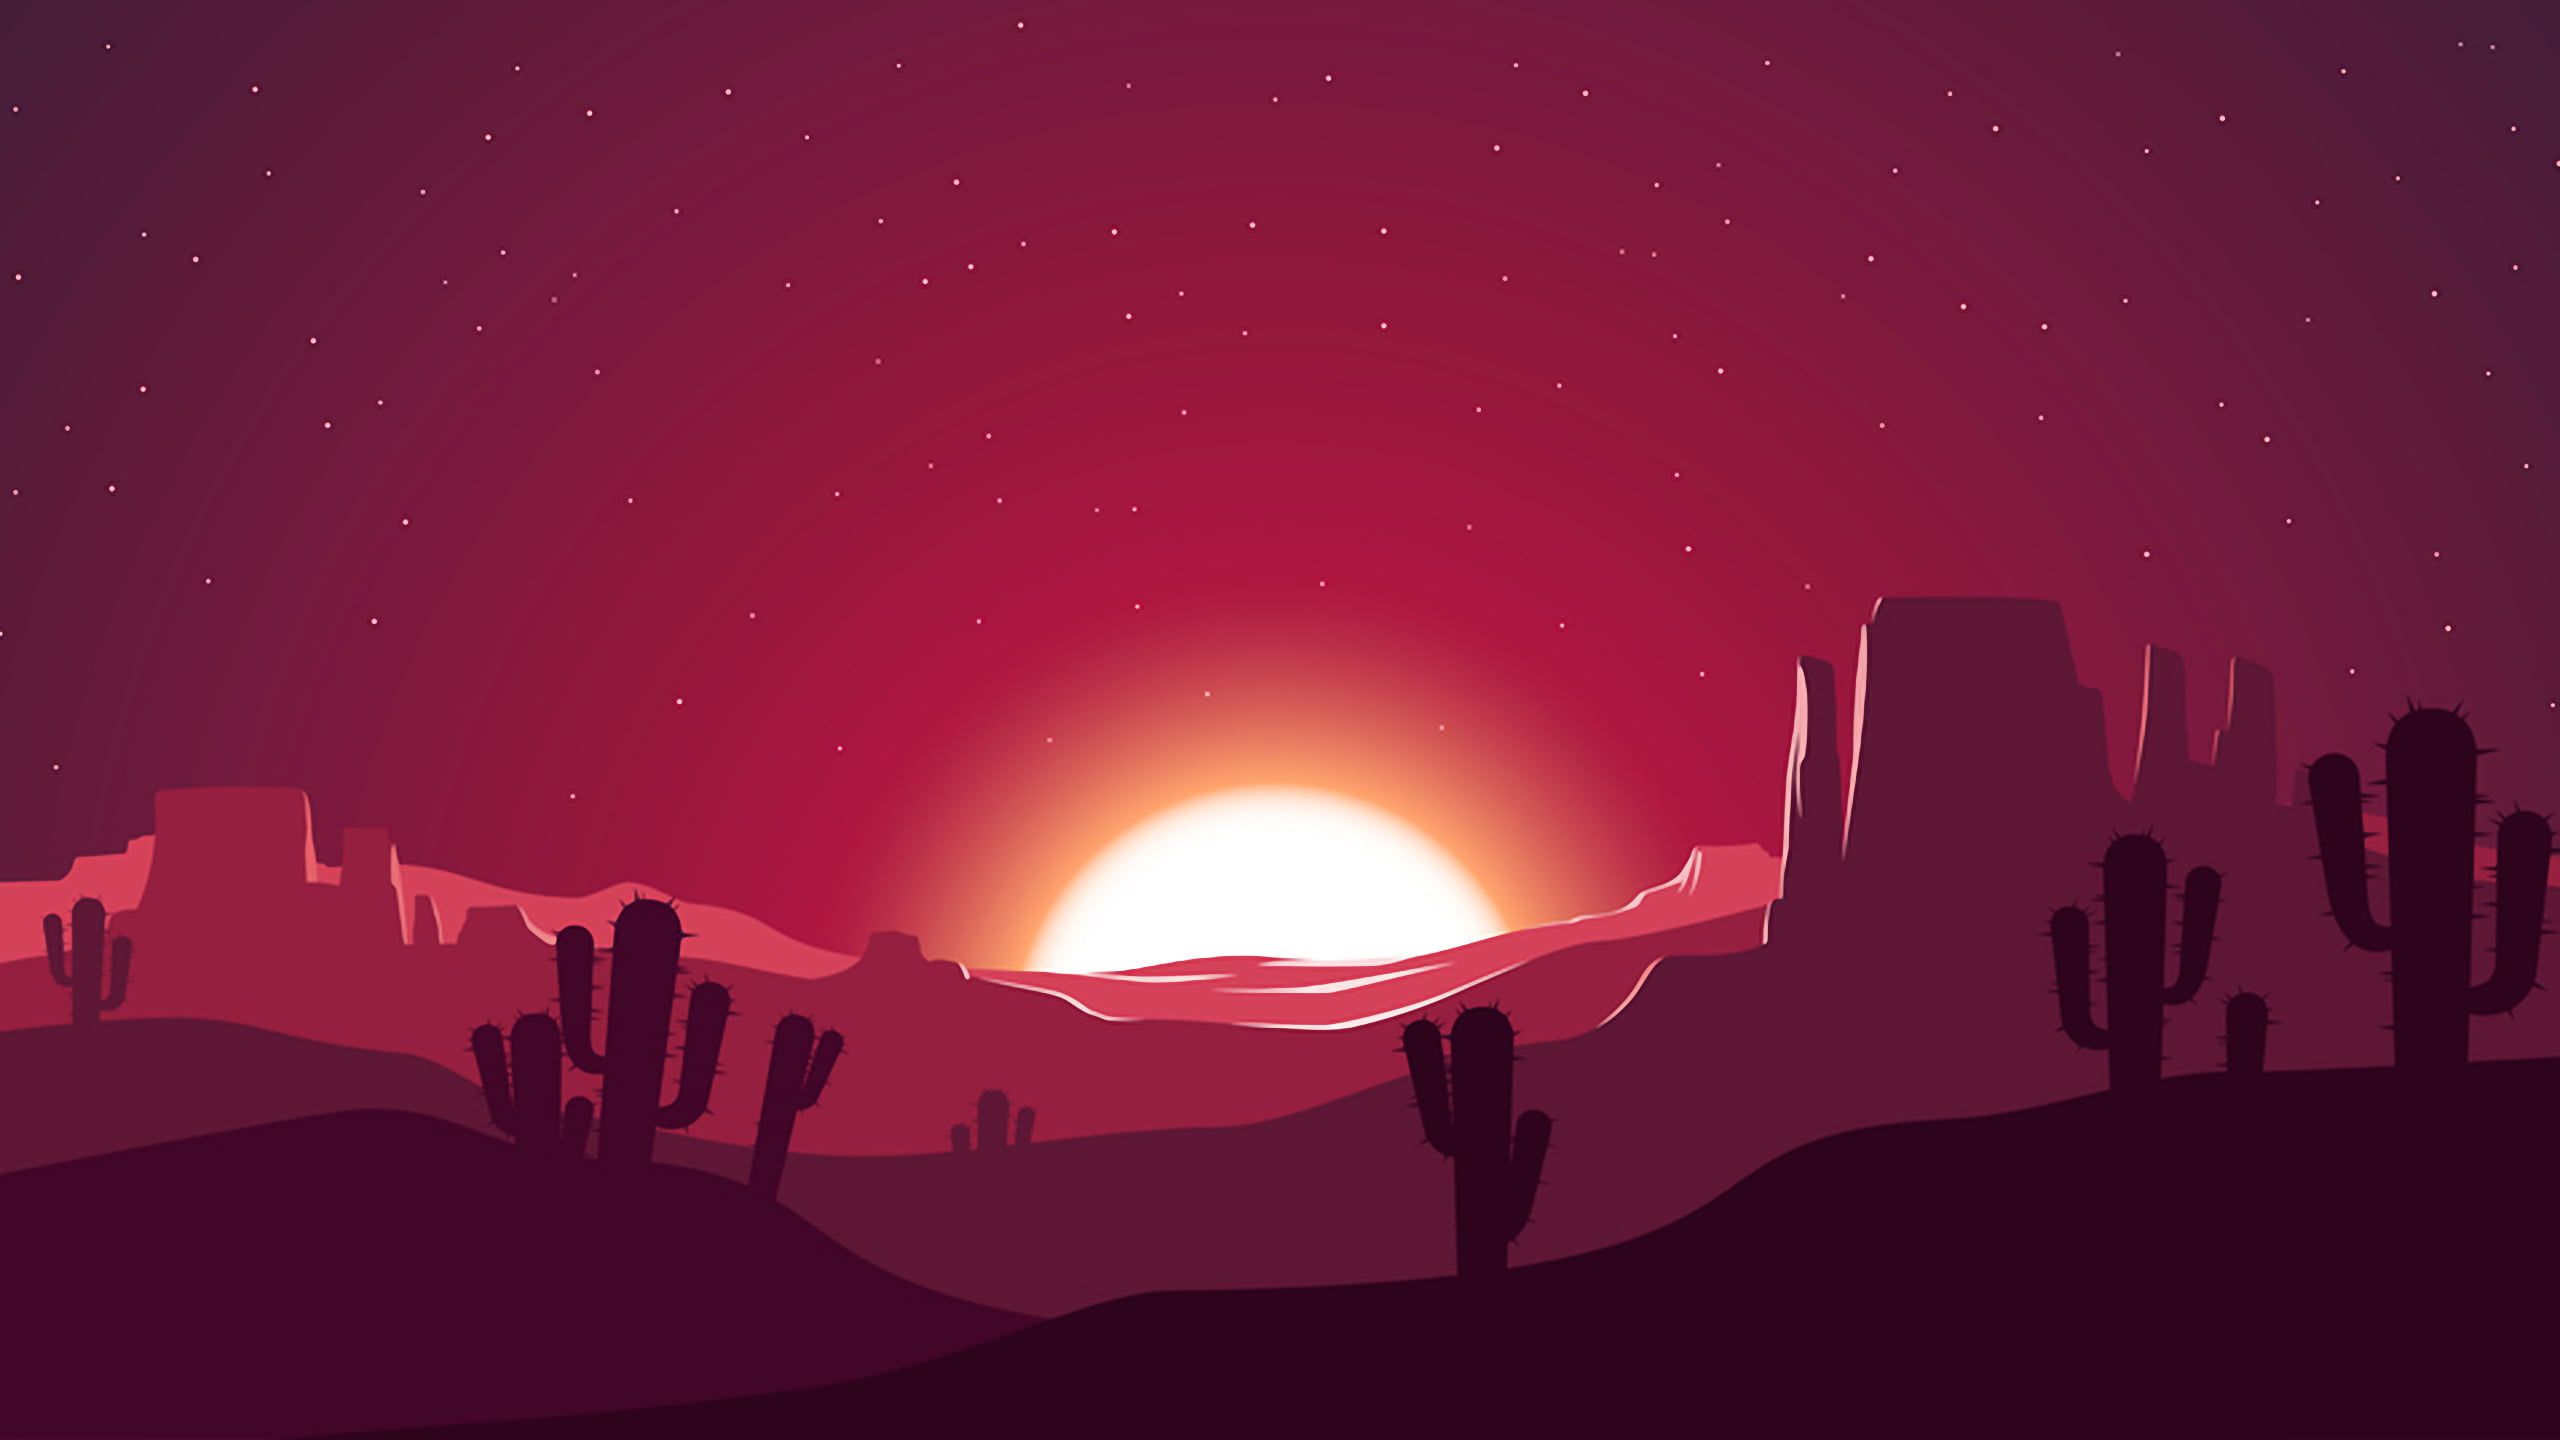 A desert landscape with a cactus in the foreground and a setting sun in the background. - Desert